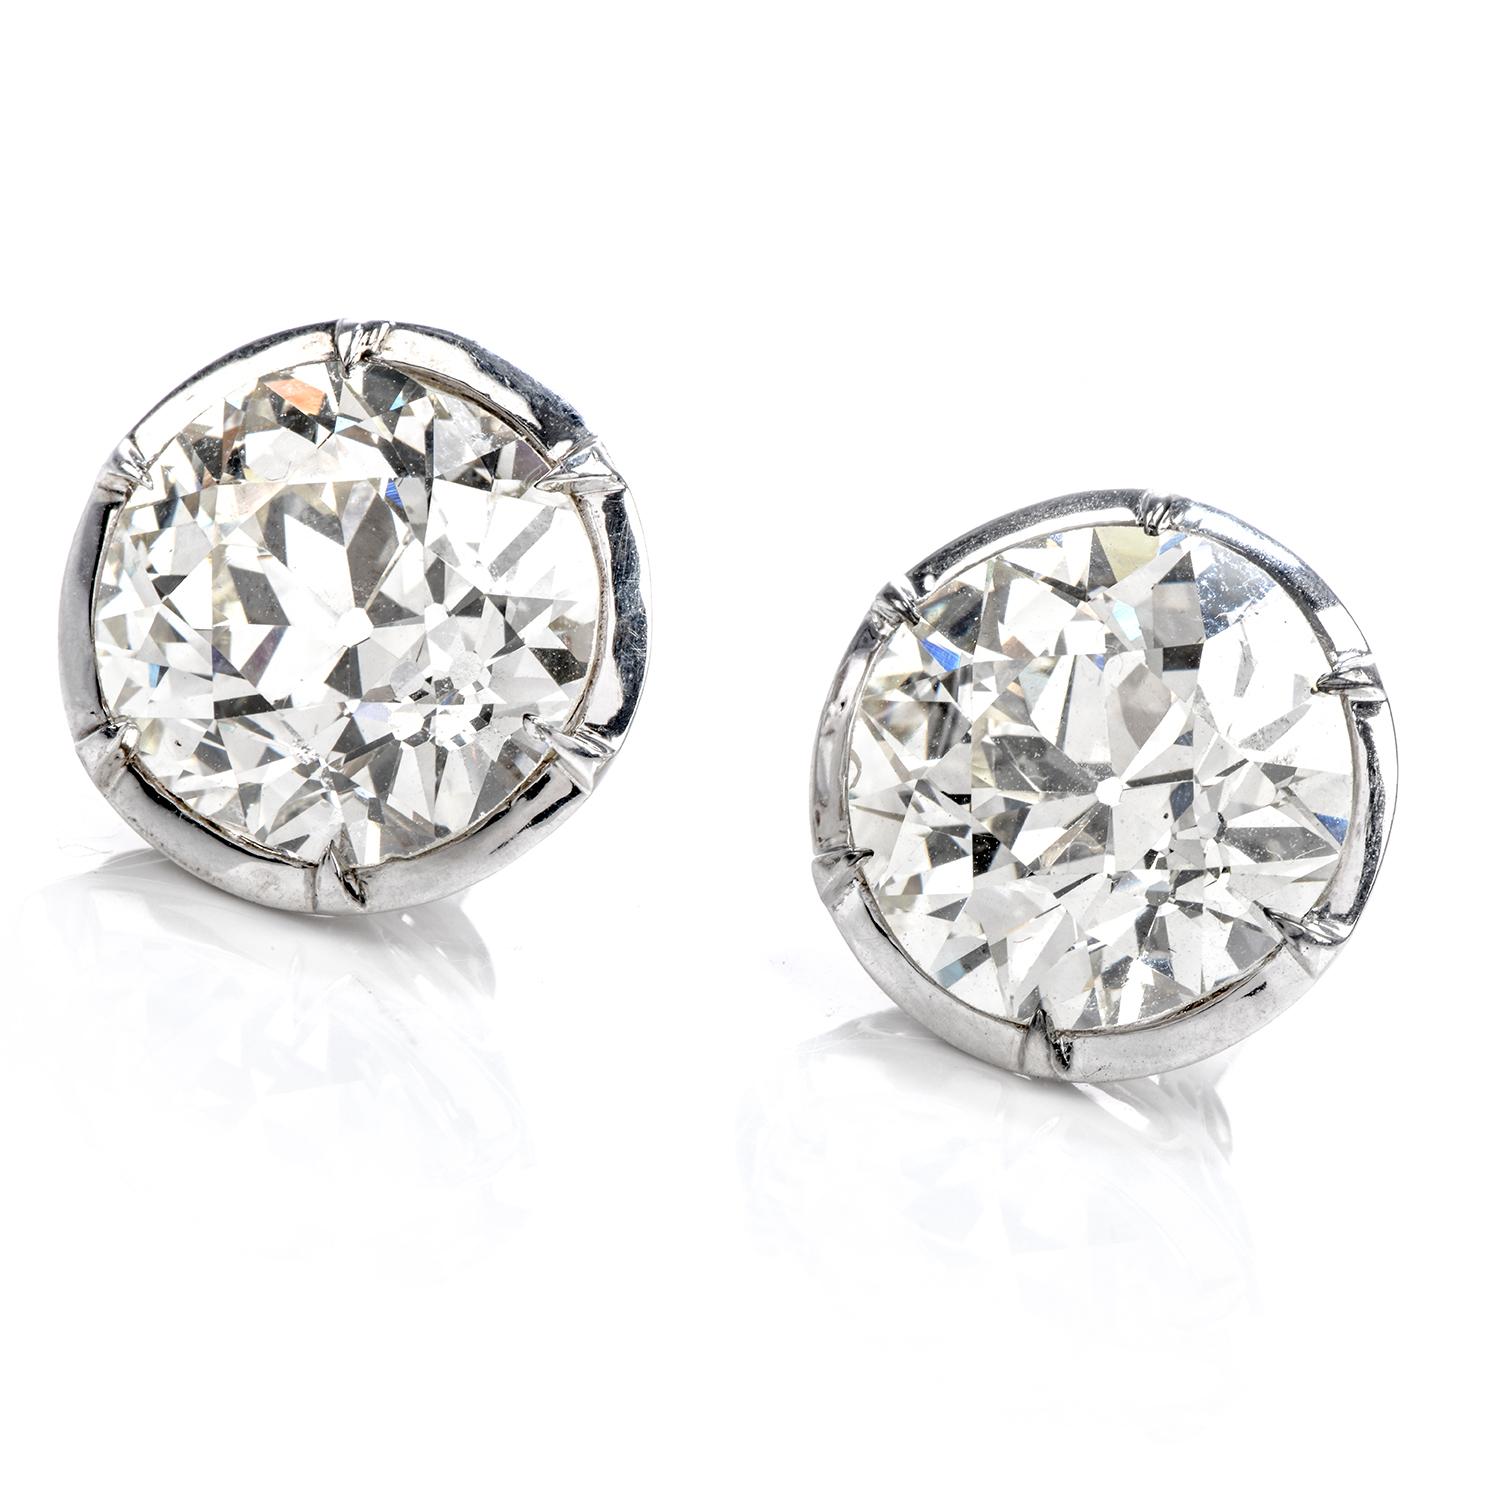 These will make a Statement ANYWHERE!

This magnificent pair of Vintage Old European Cut Diamond Stud Earrings will make any statement you wish to make!  

The large focal diamonds are each GIA Certified.  One is 6.93 carats graded N color and SI1